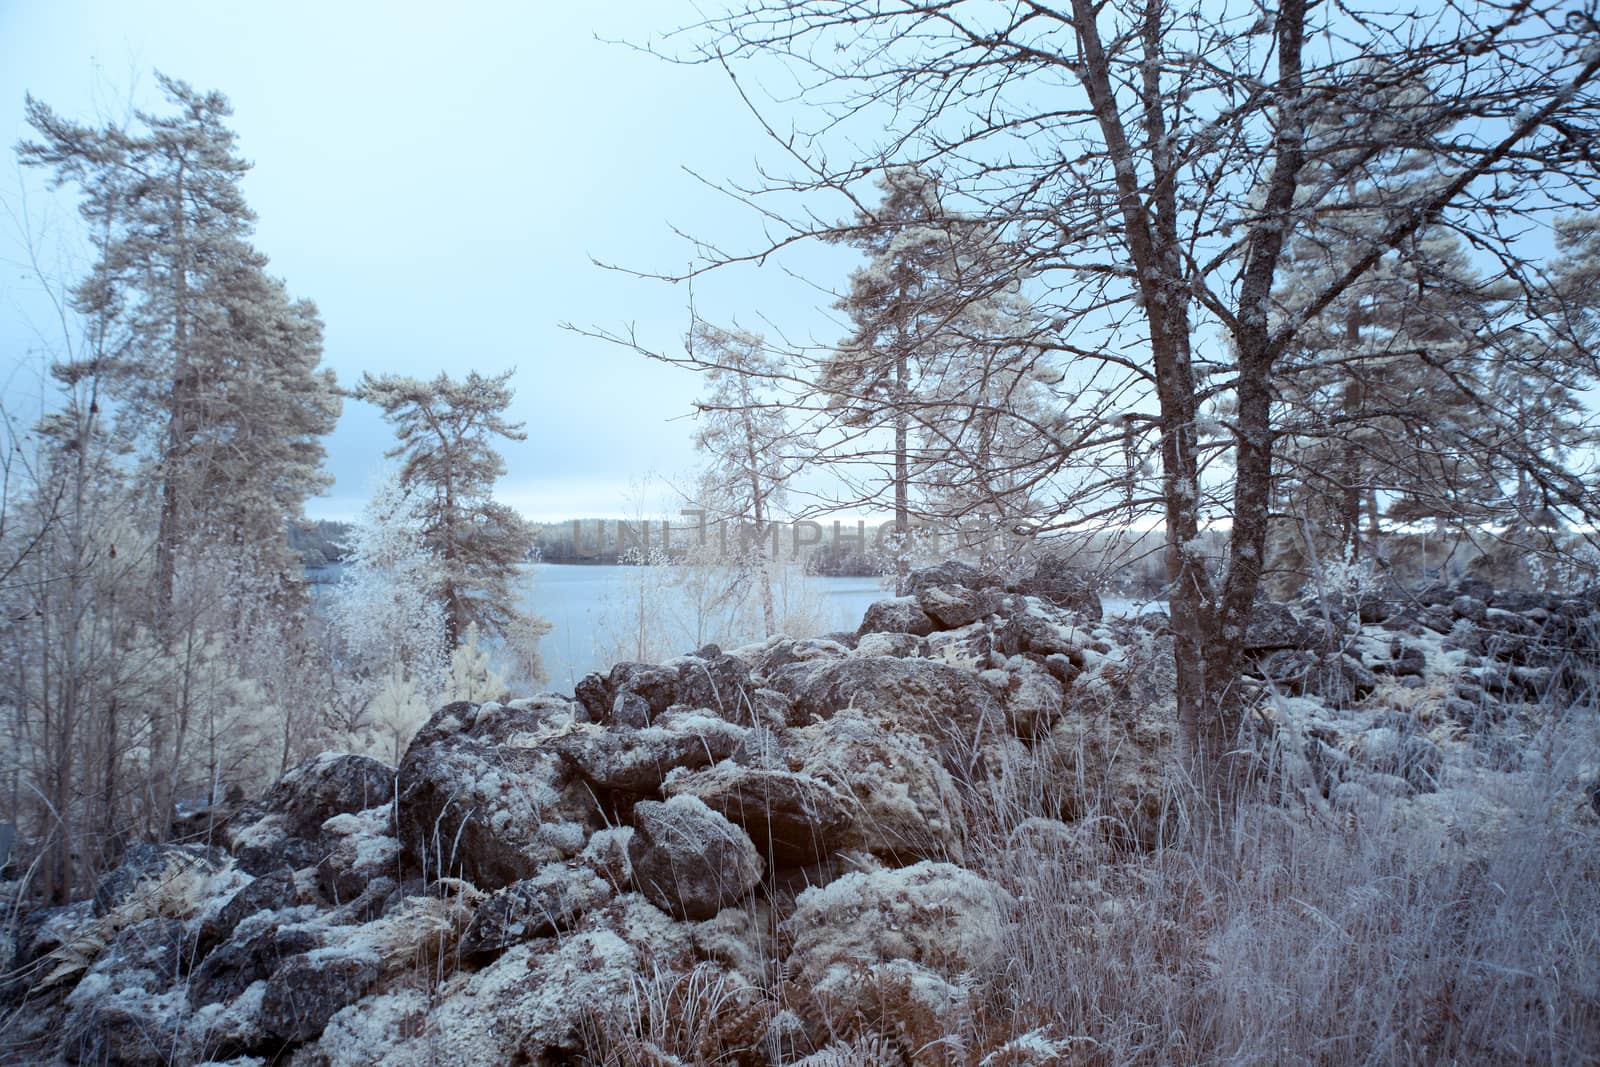 Stenhammar hill with part of the stone wall